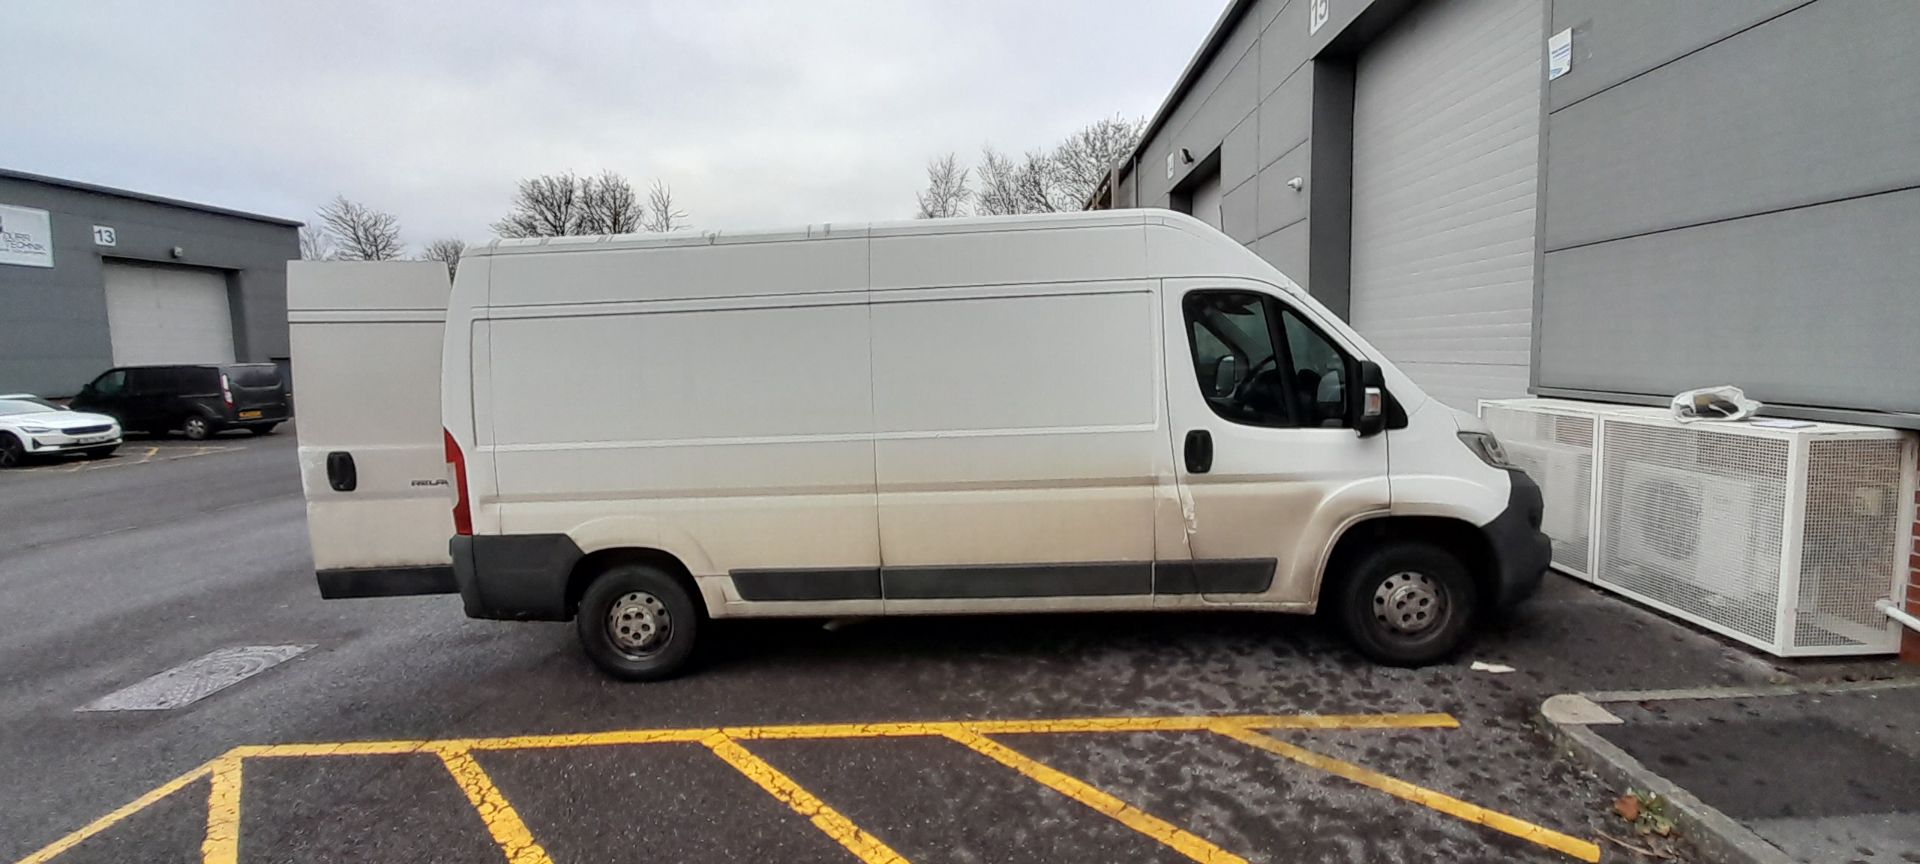 Citroen Relay Registration BT64 XCM, 104,109 miles - This vehicle does not have a V5C Document, the - Bild 2 aus 11